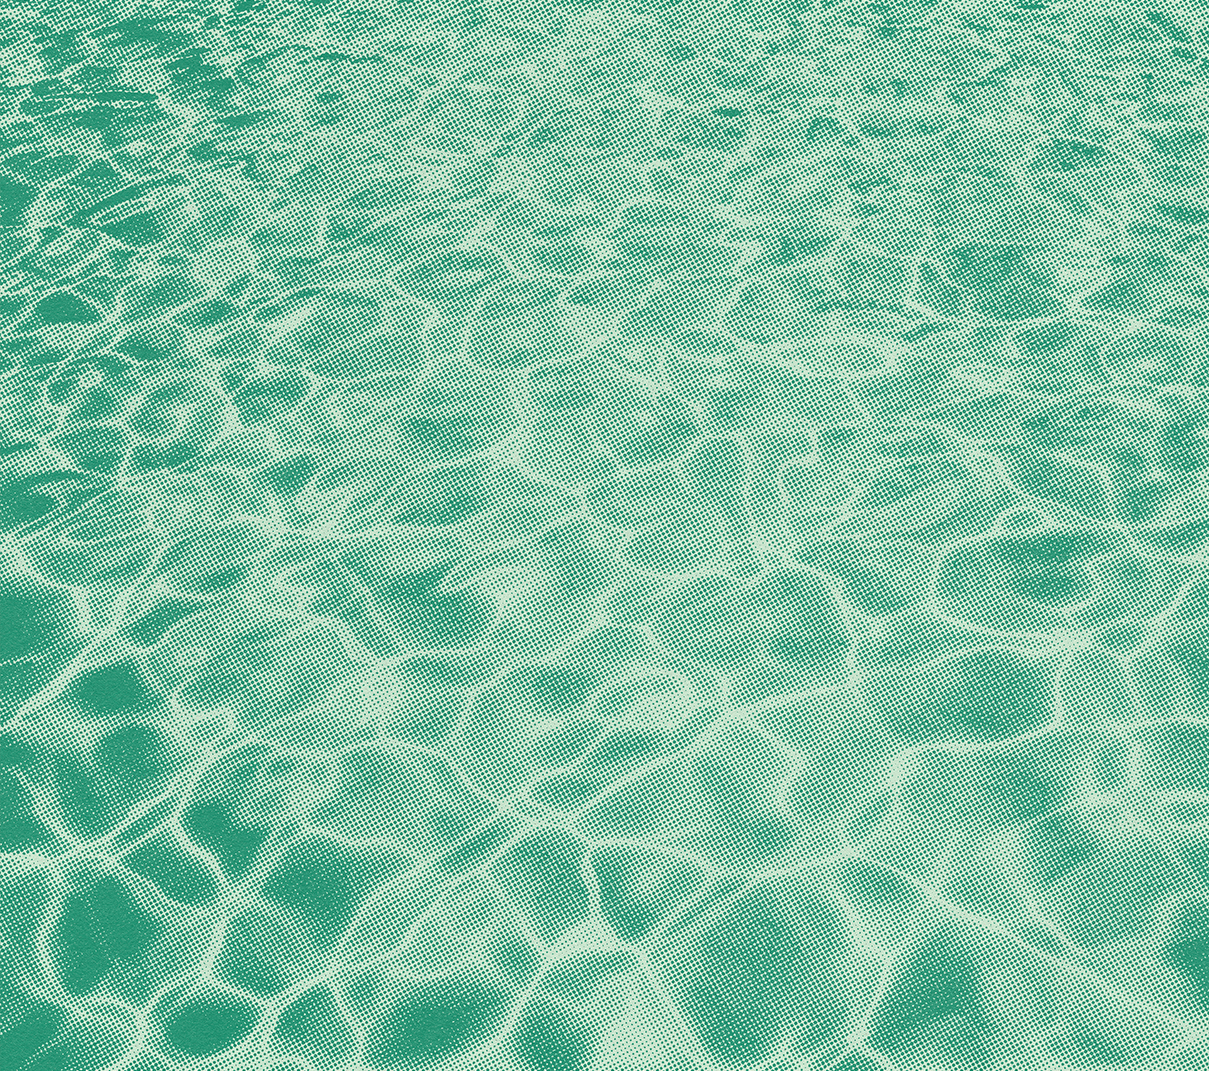 Halftone image of pool in mint and teal